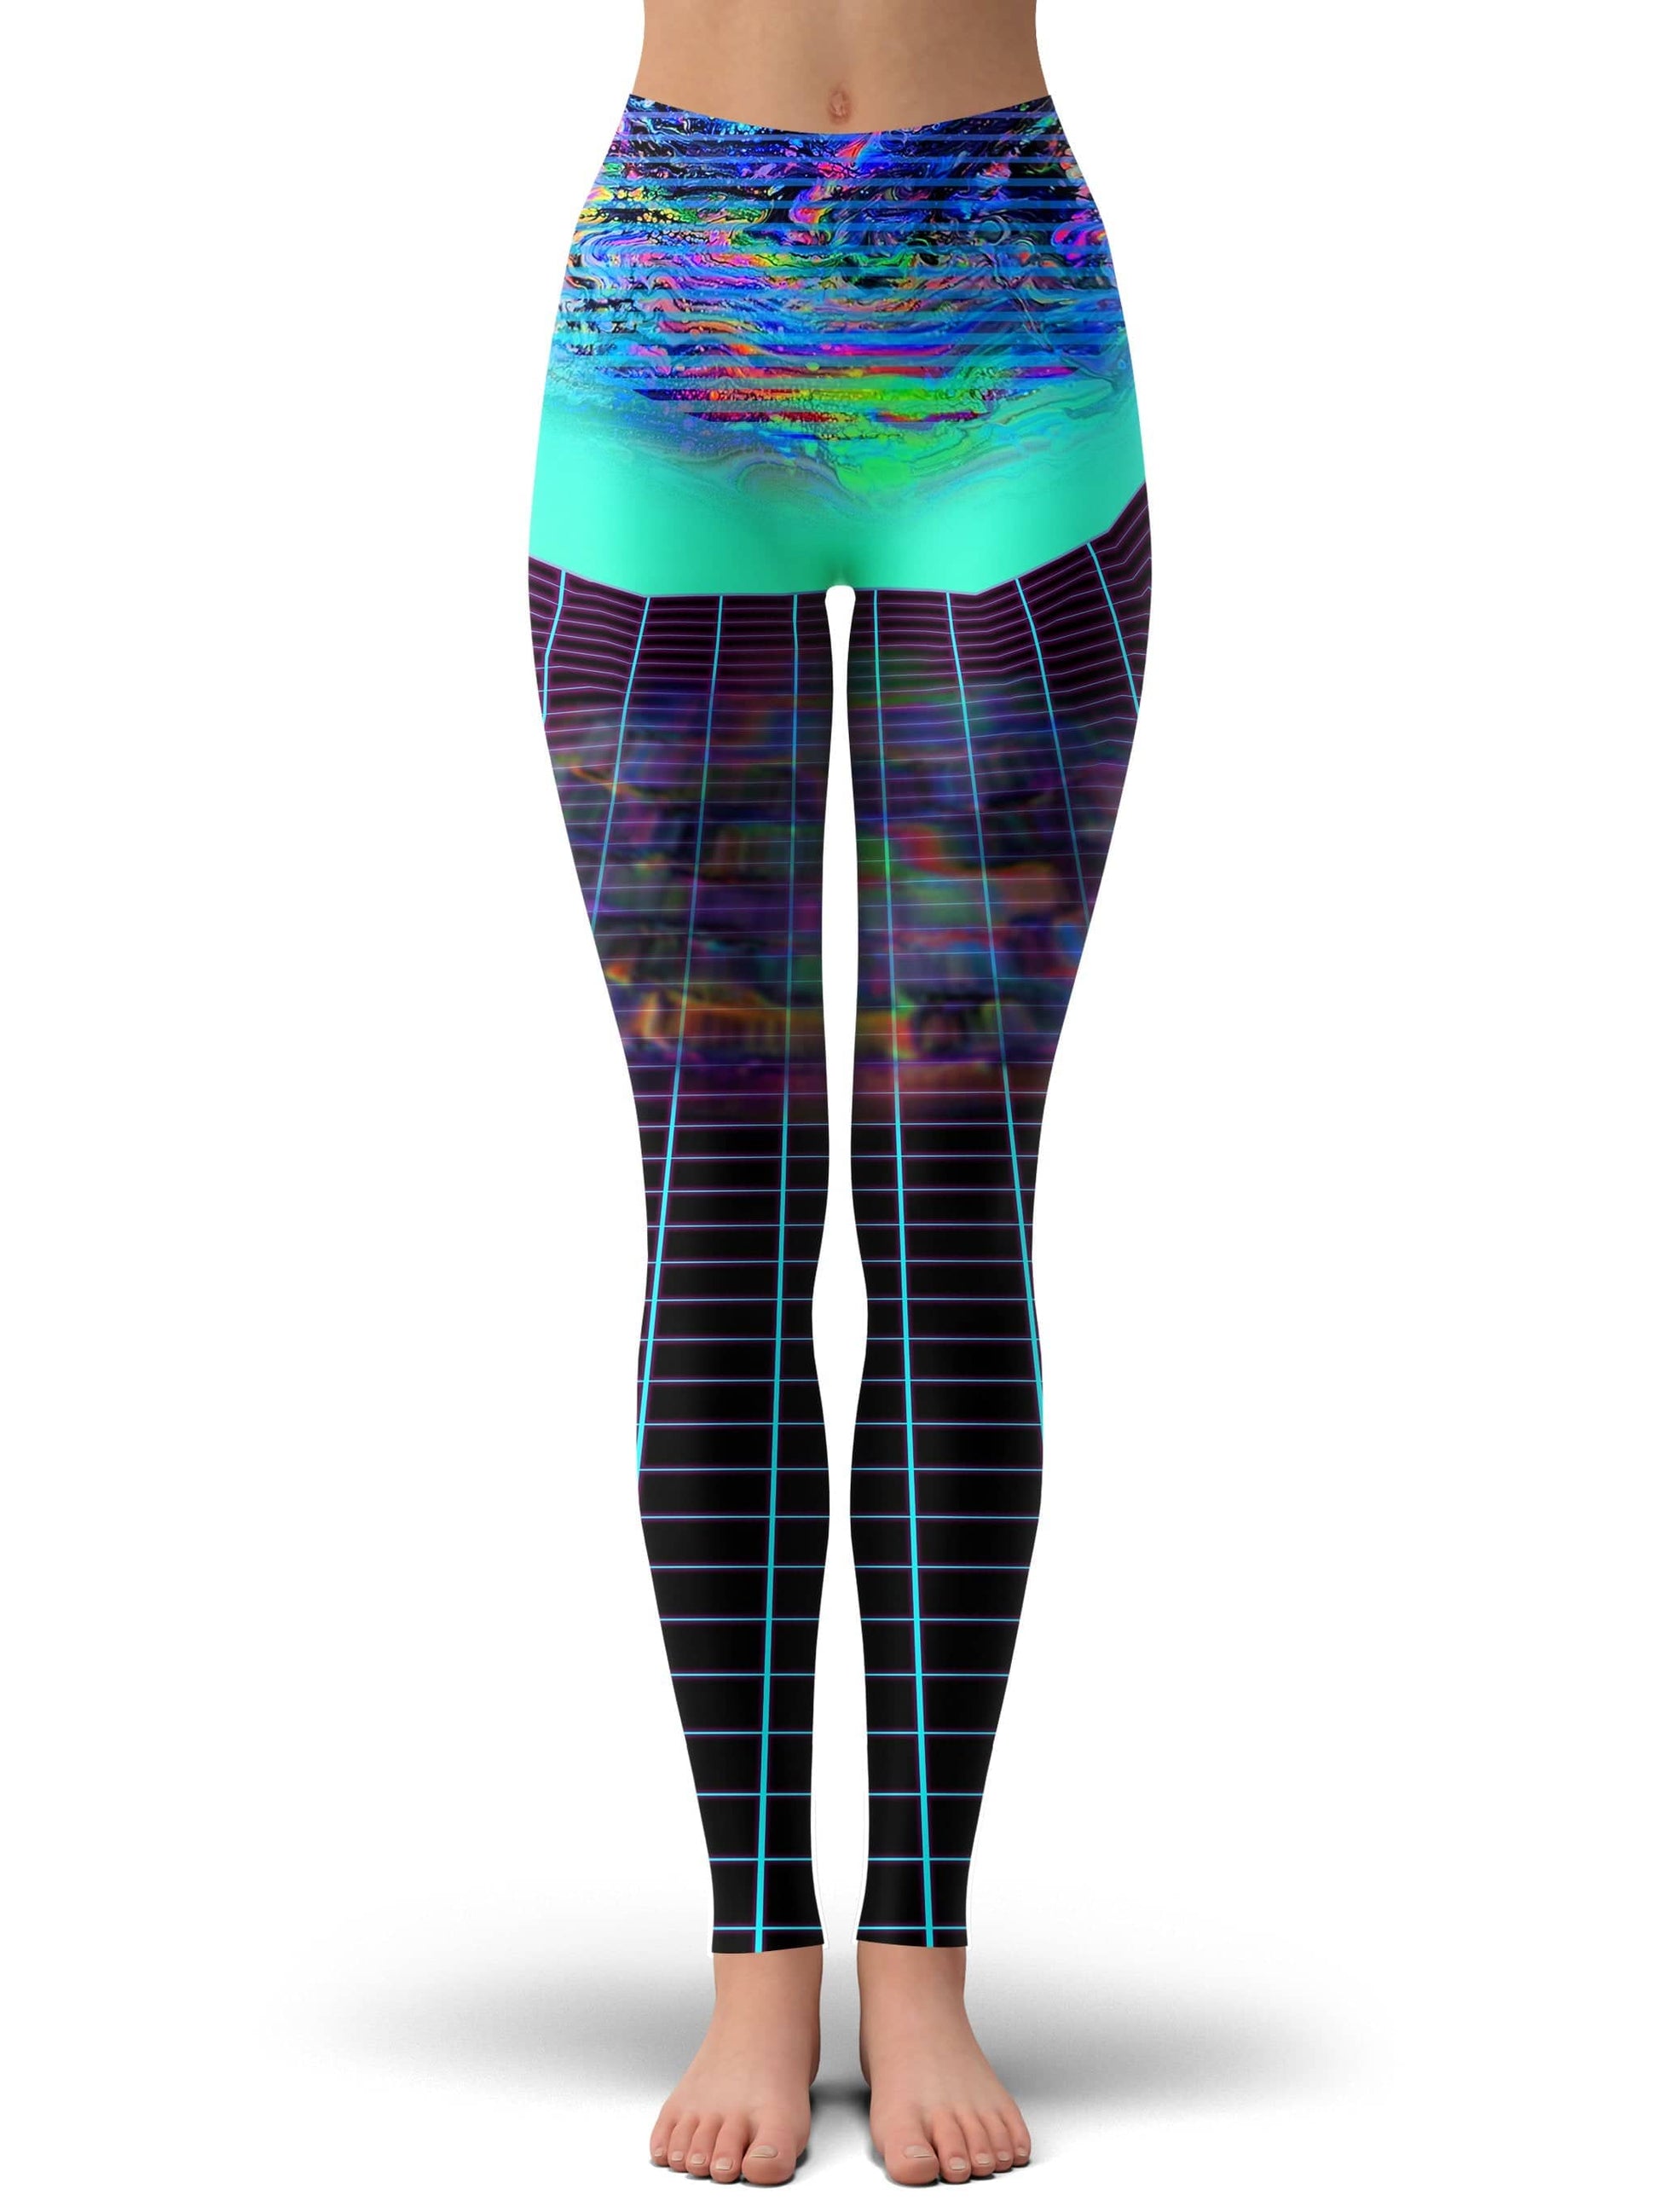 Psychedelic Outrun Leggings, Psychedelic Pourhouse, | iEDM